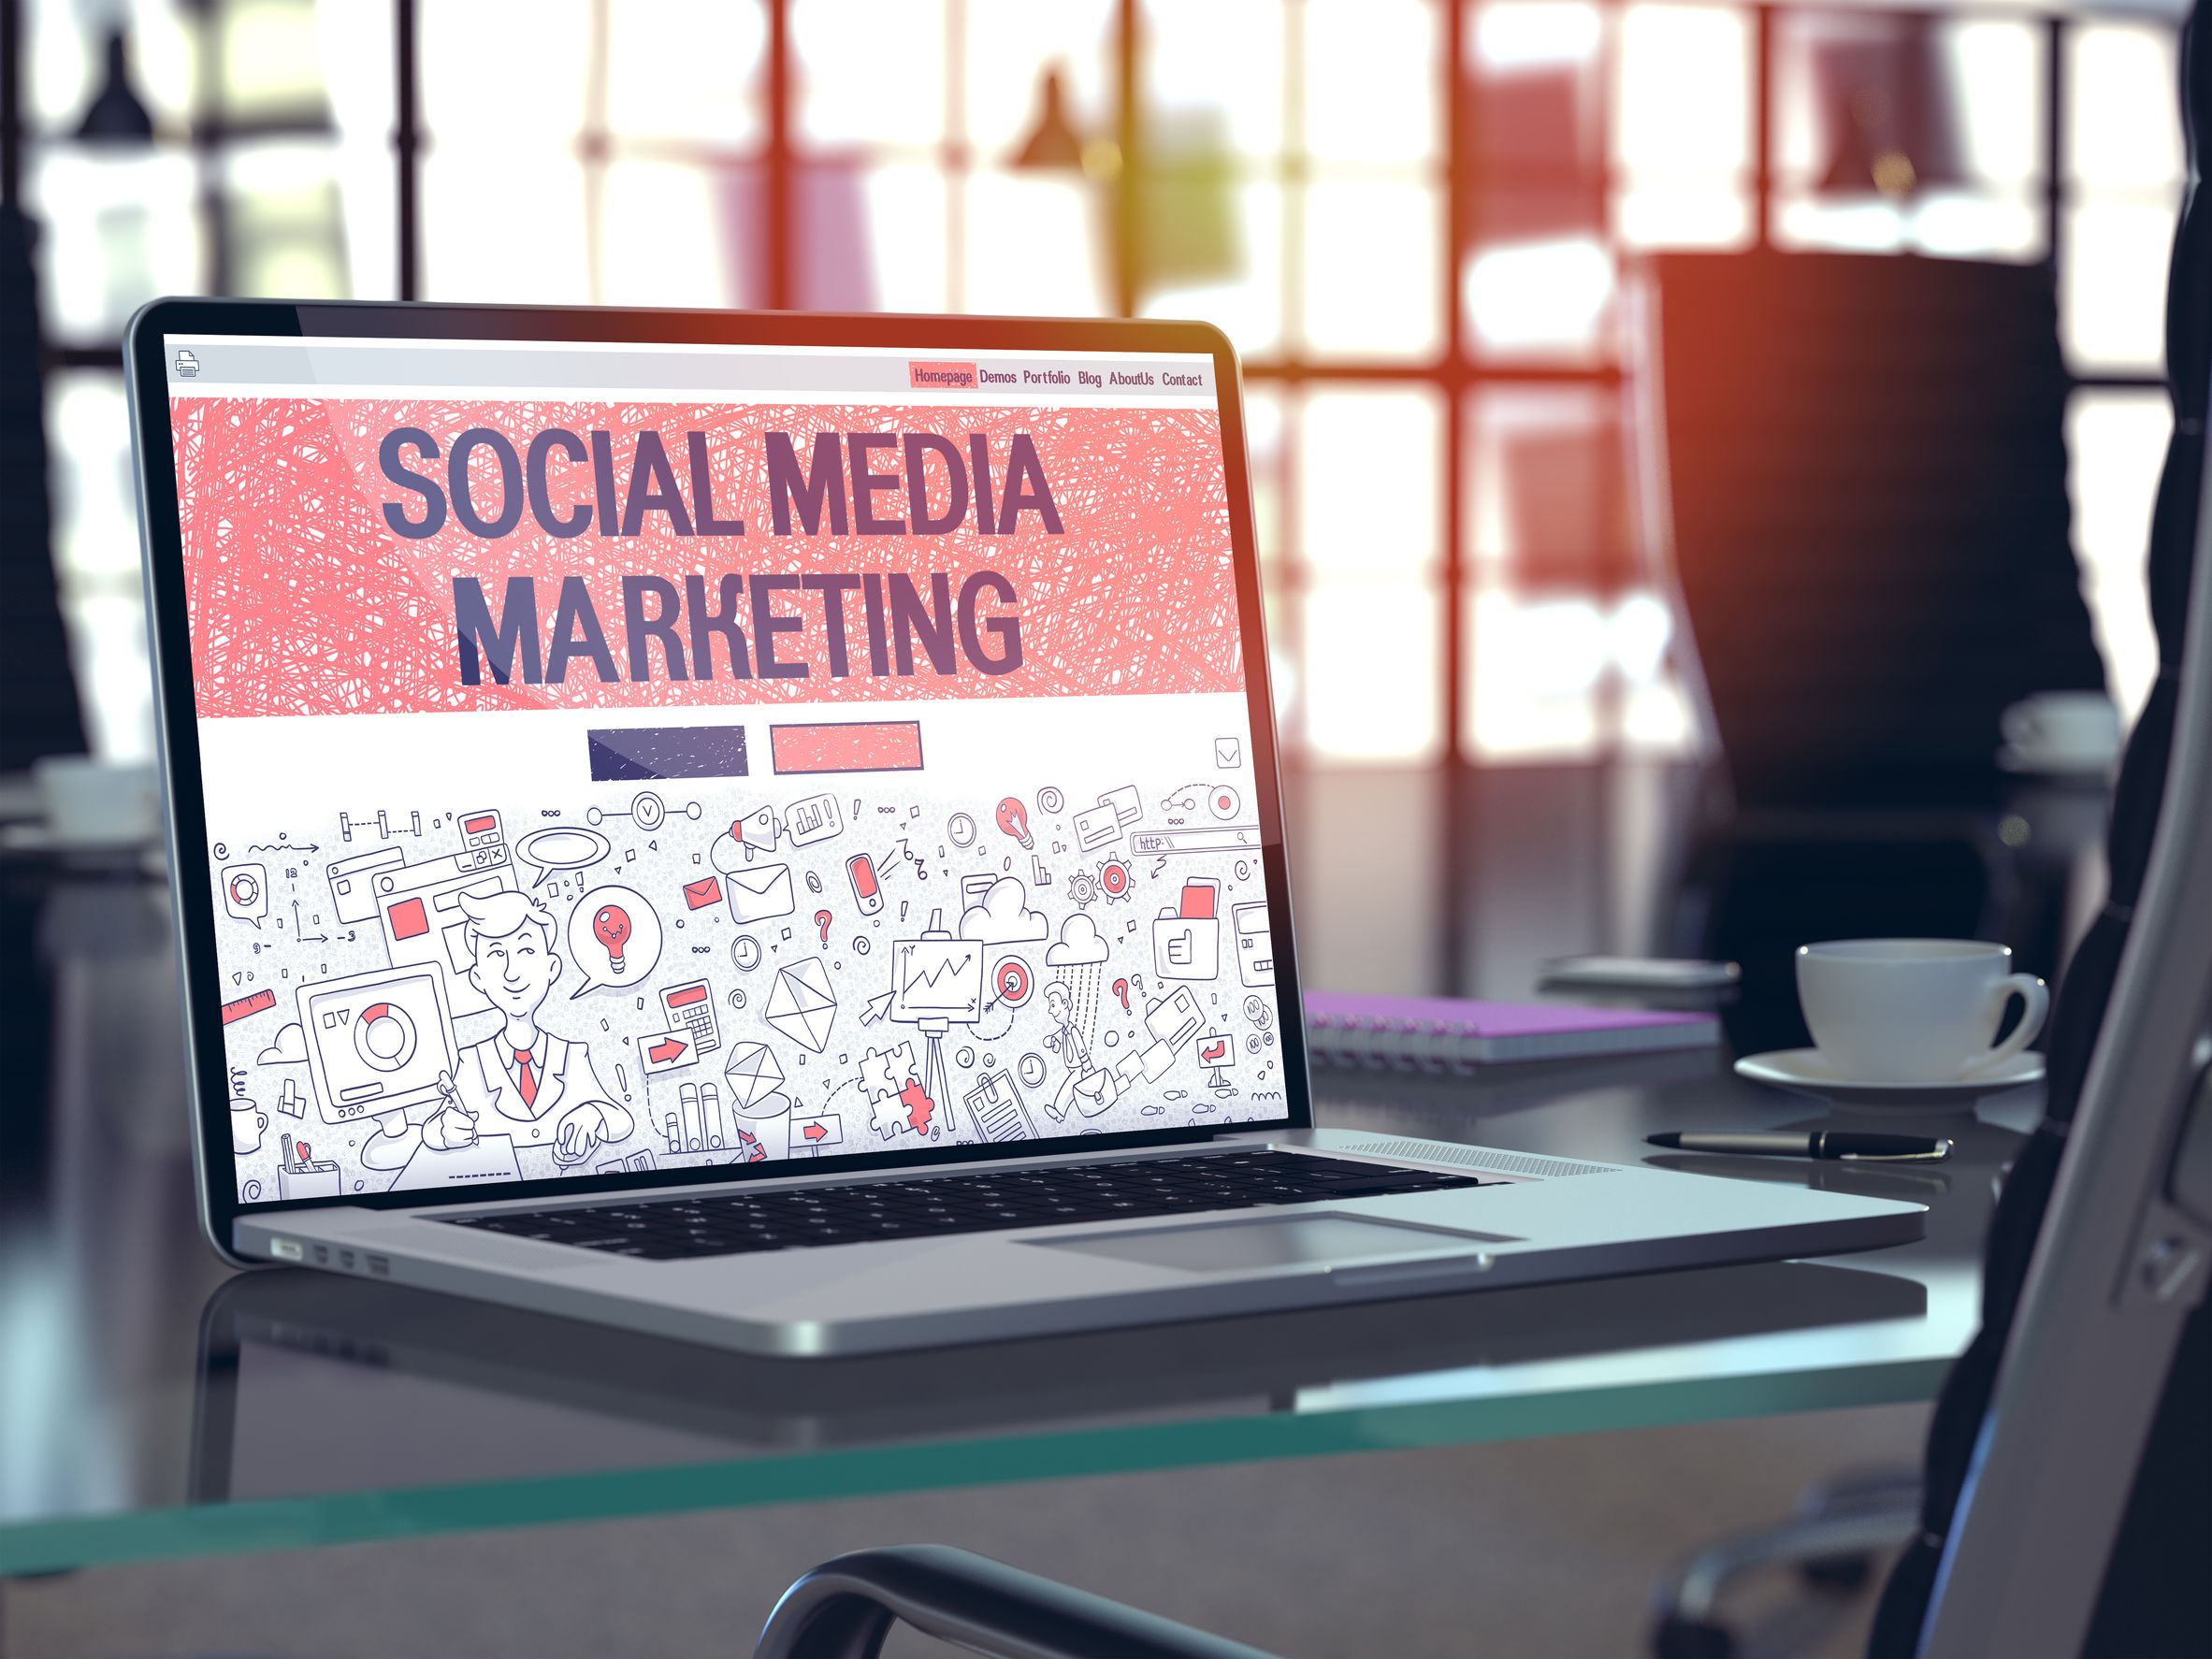 On-Target! Makreting | Digital Marketers In Houston | Pros and Cons of Social Media Marketing 